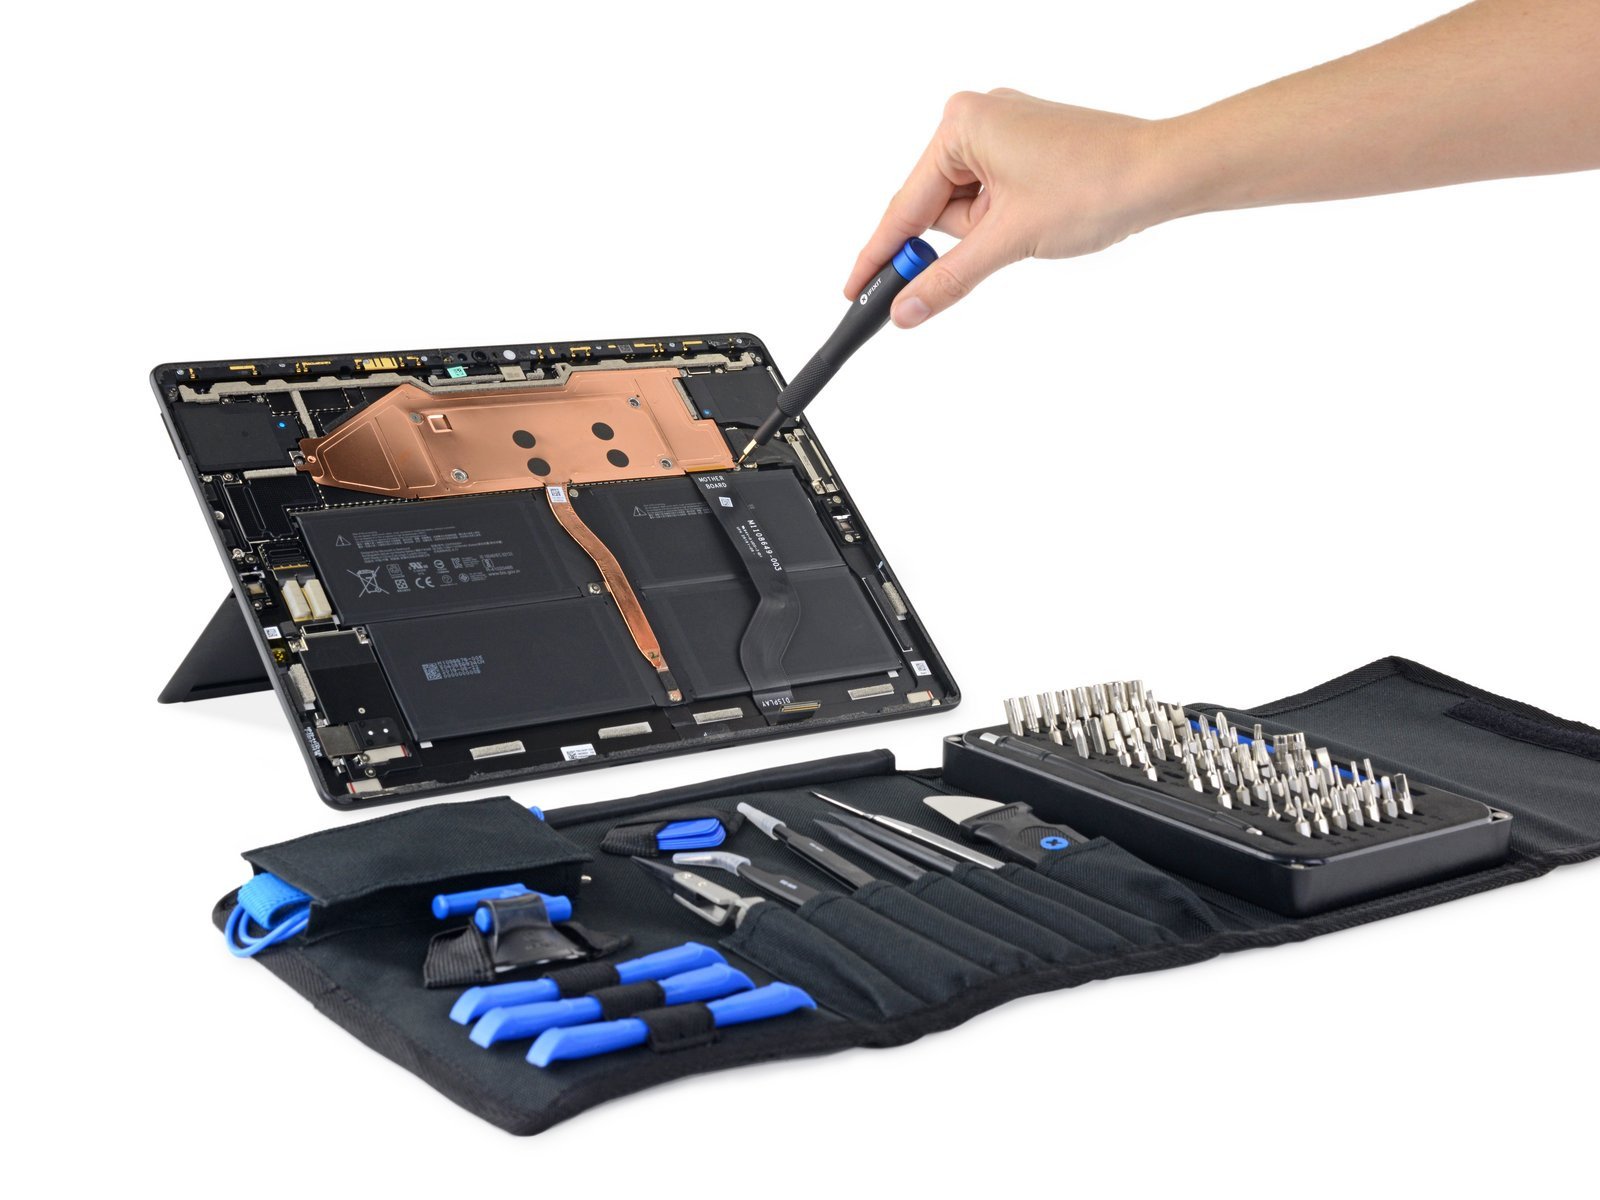 Microsoft's Surface Pro X Is the Most Repairable Surface Ever